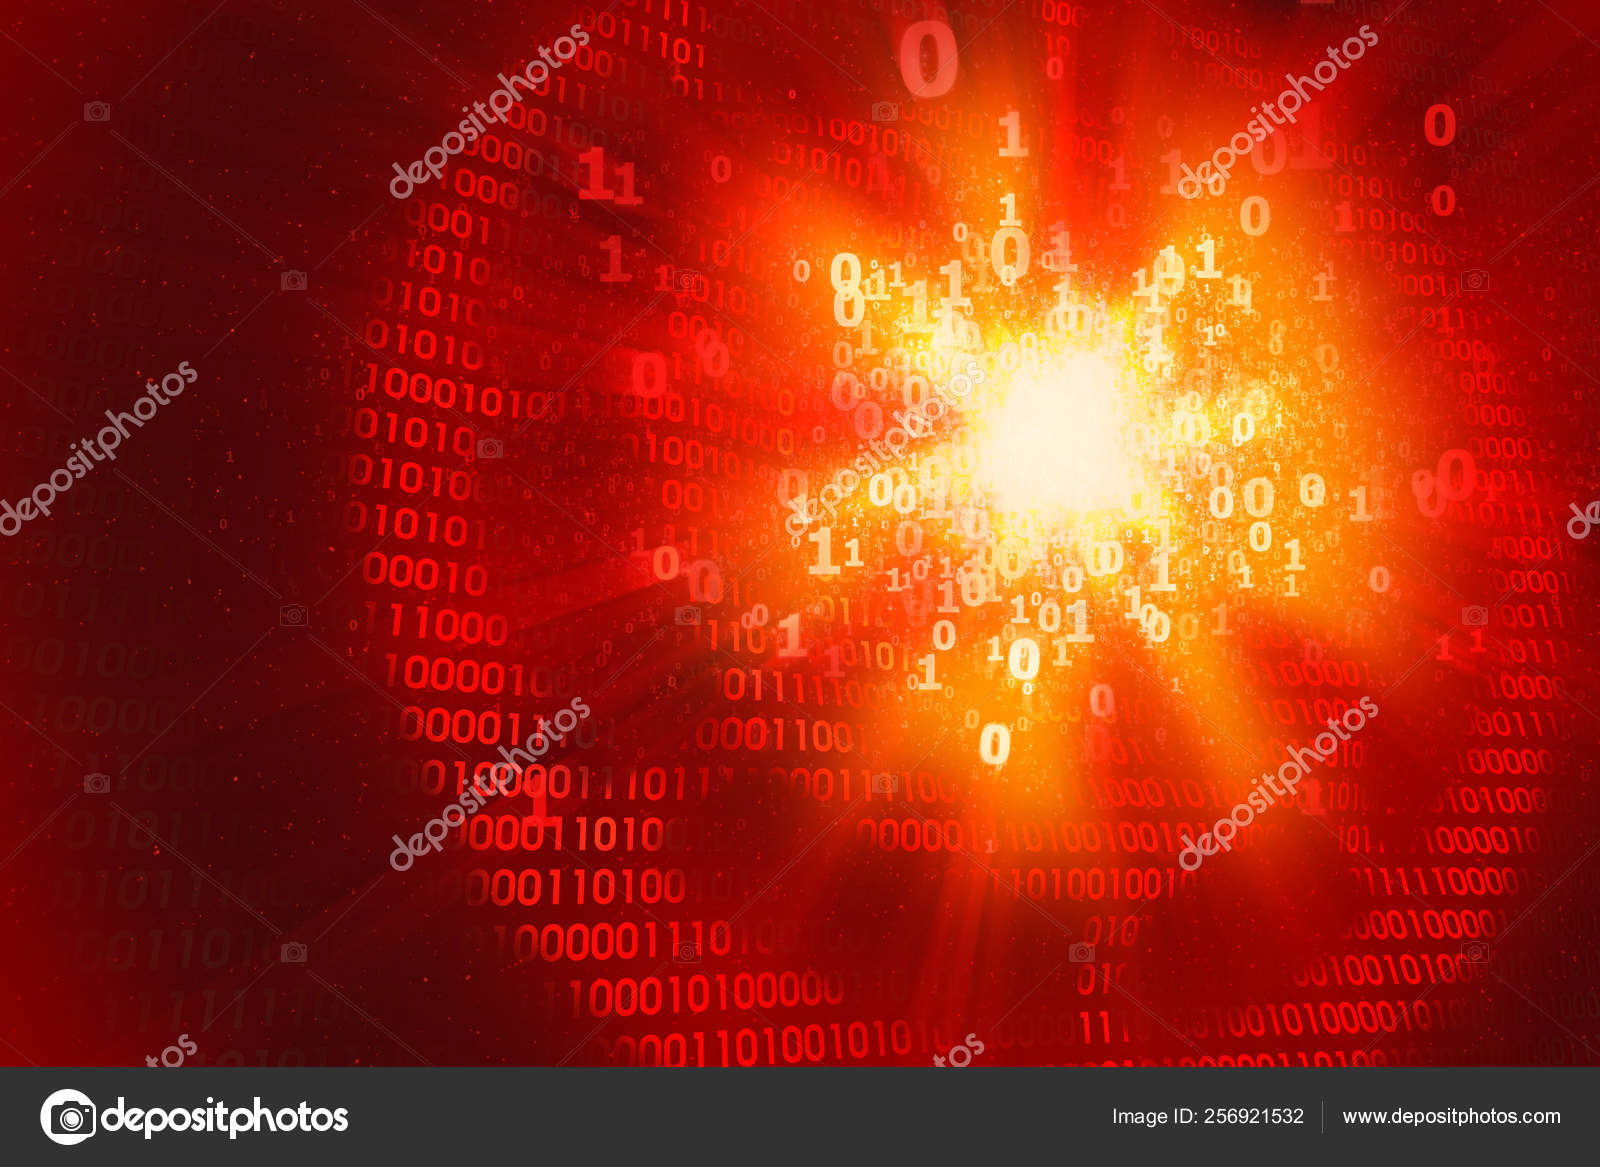 Hacking Computer System Database Internet Server Ddos Attack Virus Malicious Code Abstract Red Binary Computer Background Digital Binary Explosion Hacking Stock Photo Image By C Valerybrozhinsky